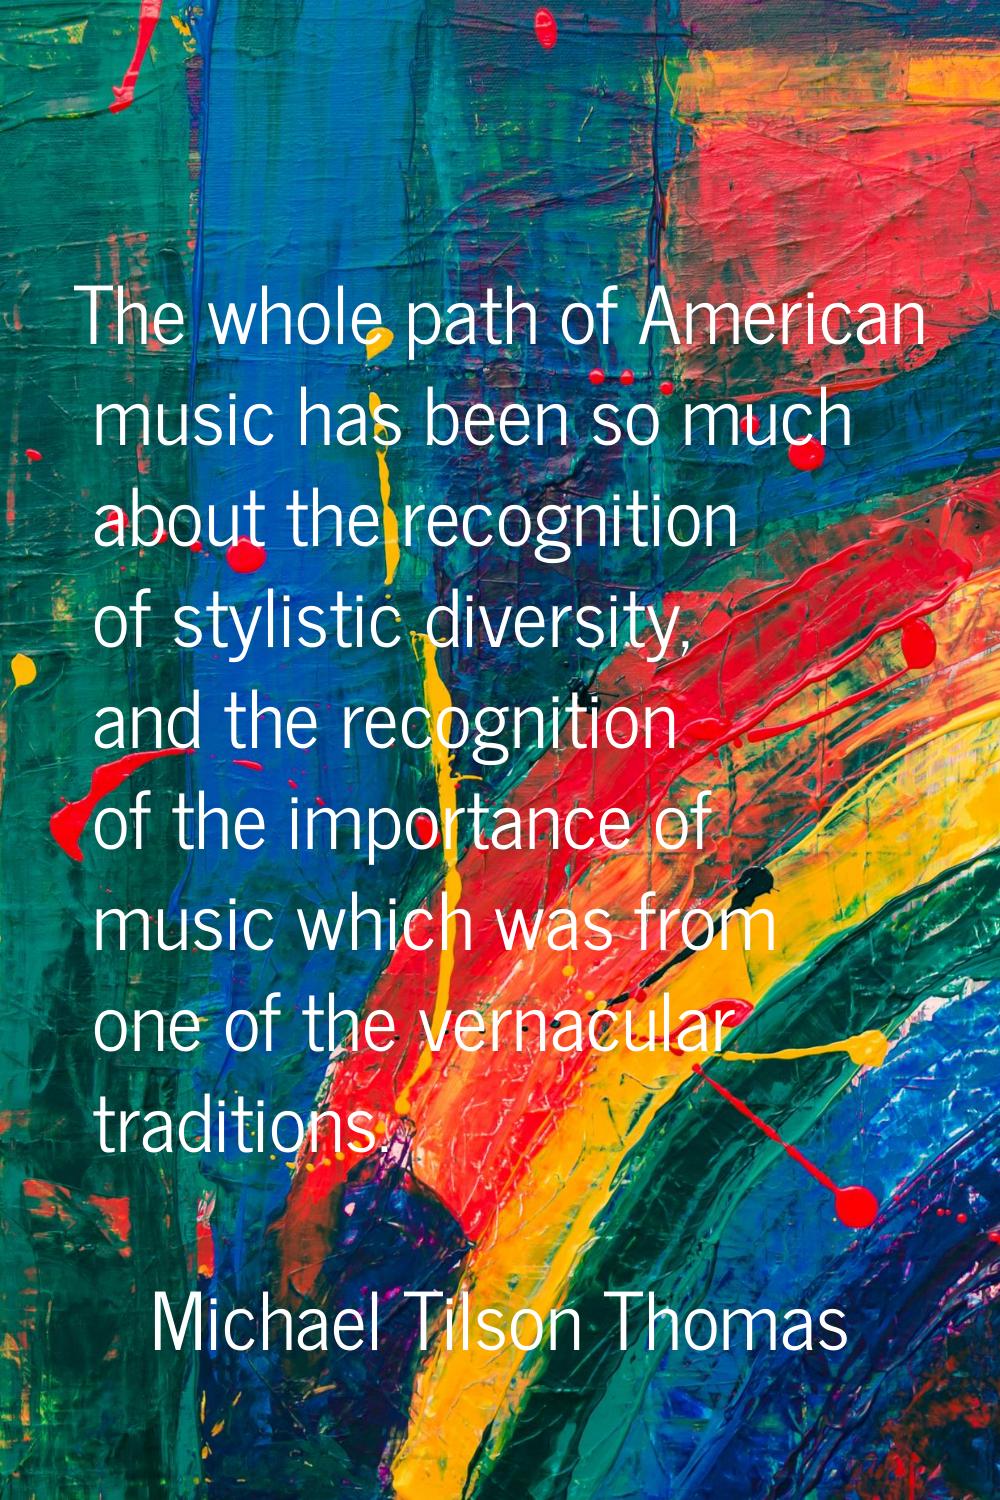 The whole path of American music has been so much about the recognition of stylistic diversity, and